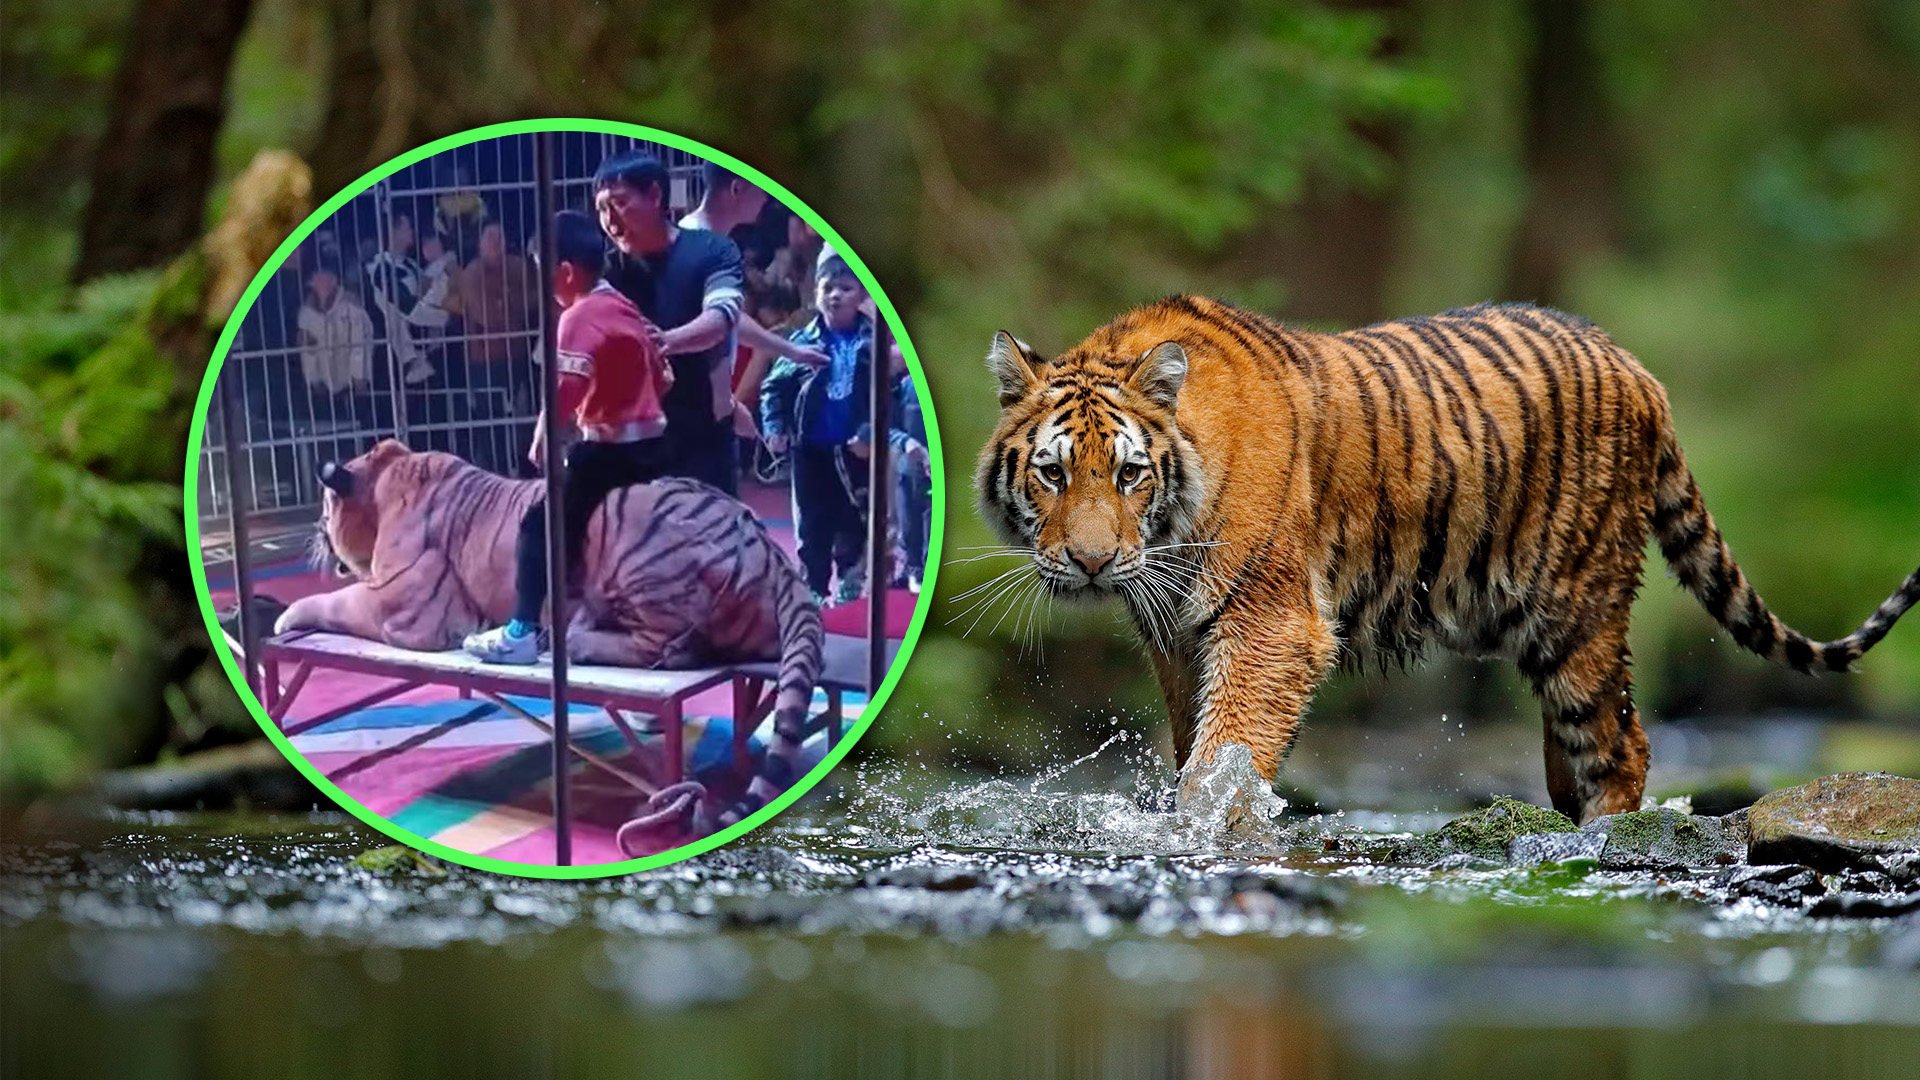 A circus in China charged visitors to ride on the back of a tiger for photos has been ordered to stop all performances pending an investigation and legal action. Photo: SCMP composite/Shutterstock/The Paper